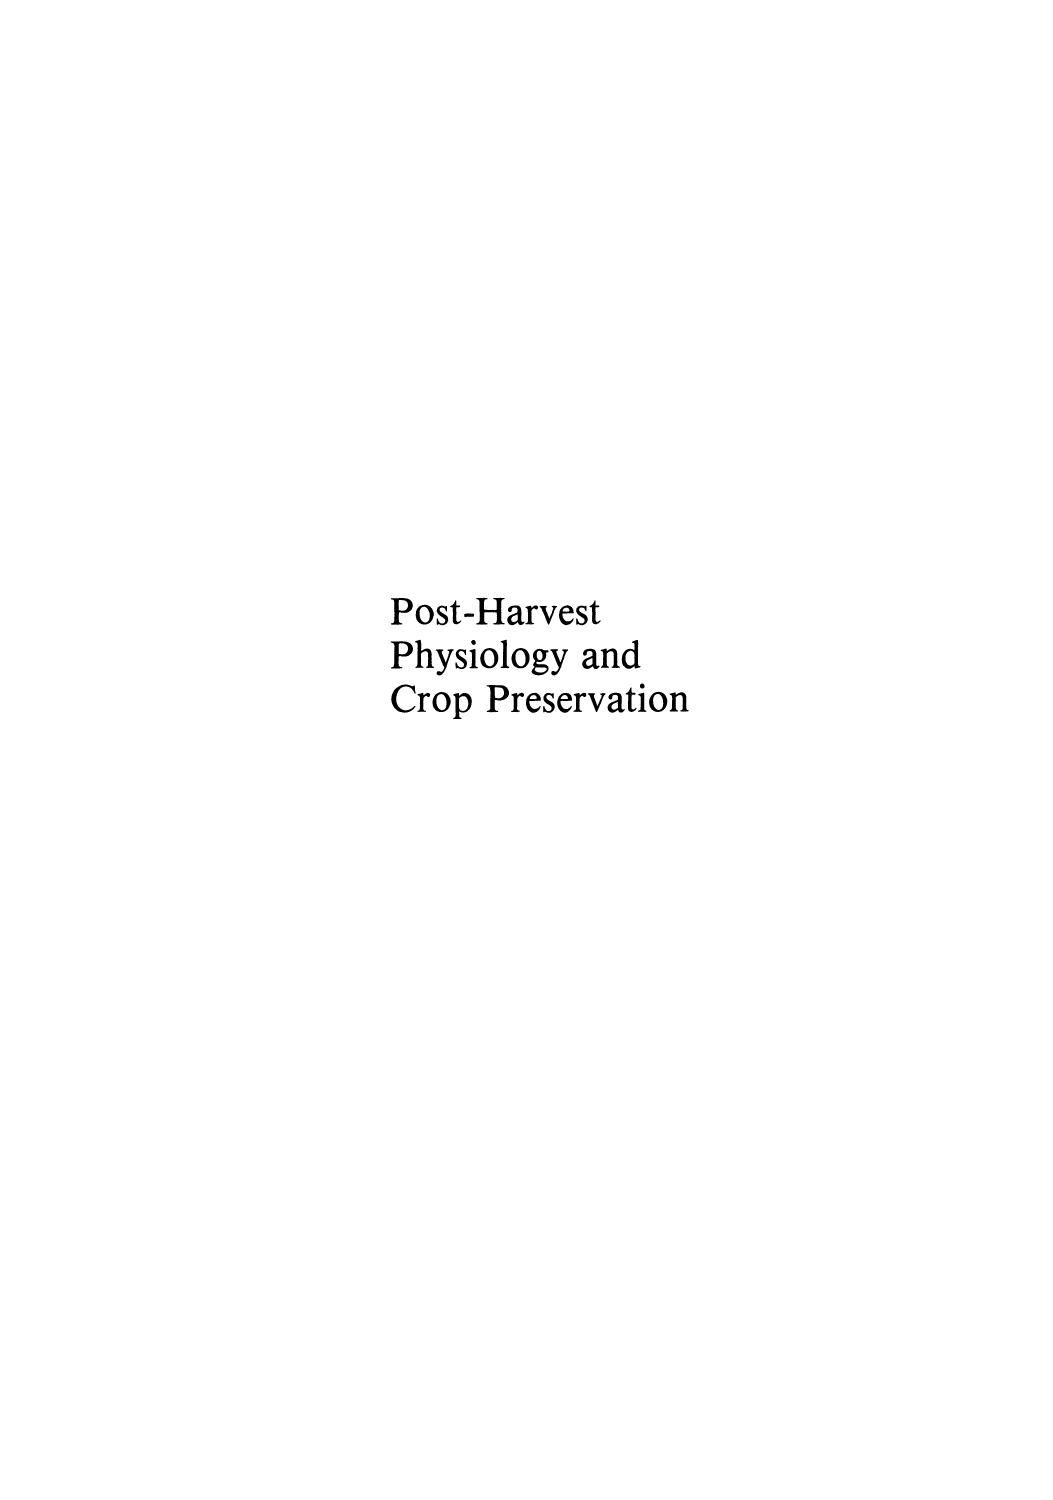 Post-Harvest Physiology and Crop Preservation ( PDFDrive ), 1981